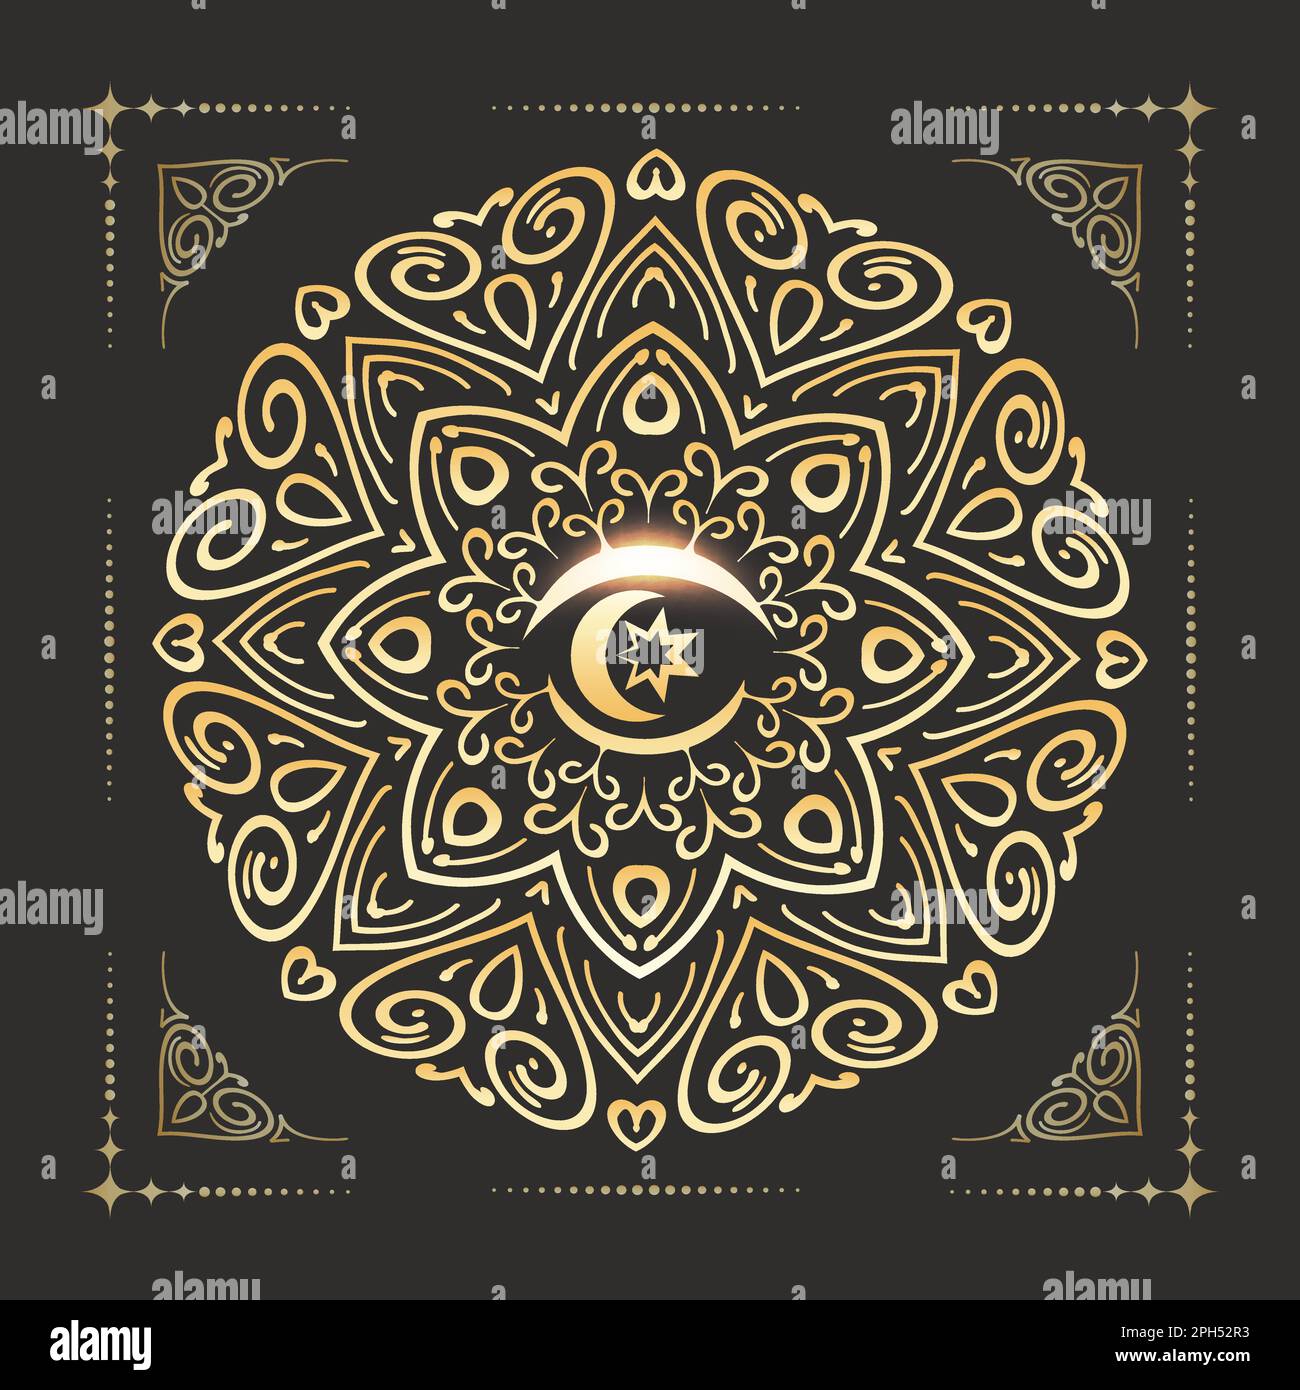 Golden Mandala ornament with Moon and Star Inside on Black Background. Vector illustration. Stock Vector